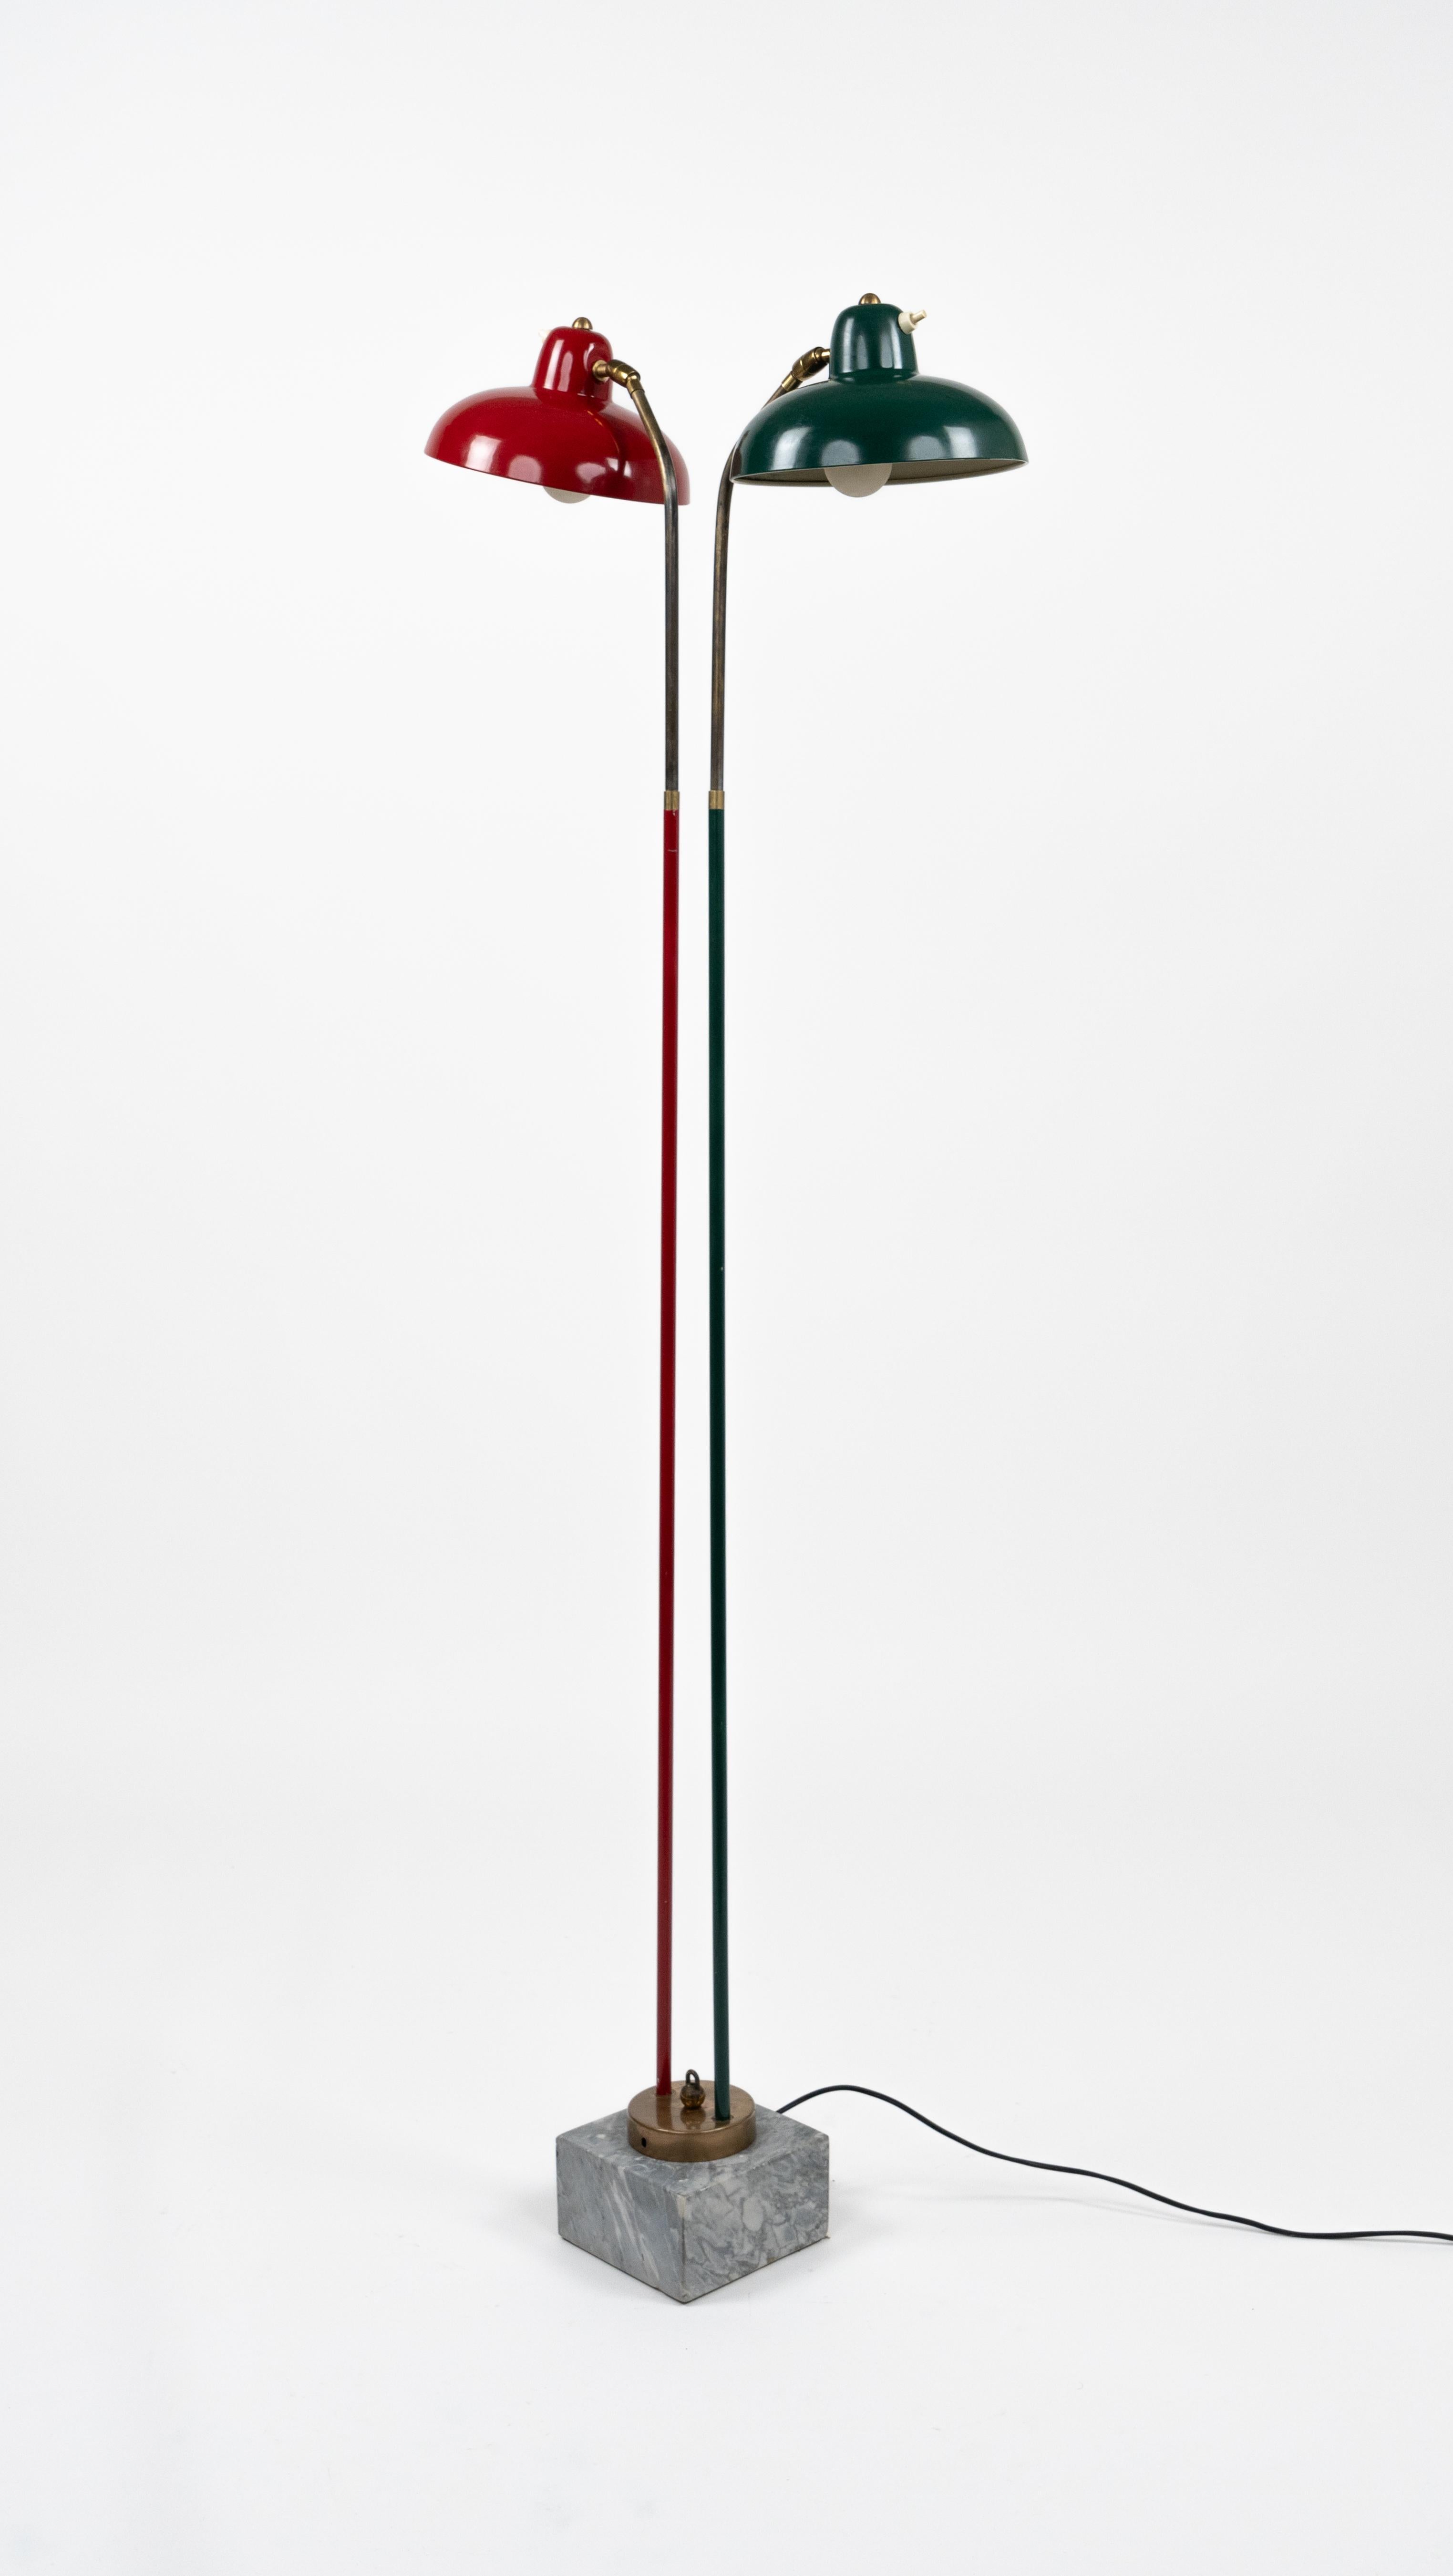 Floor Lamp in Marble, Lacquered Metal and Brass Stilnovo Style, Italy 1950s For Sale 12